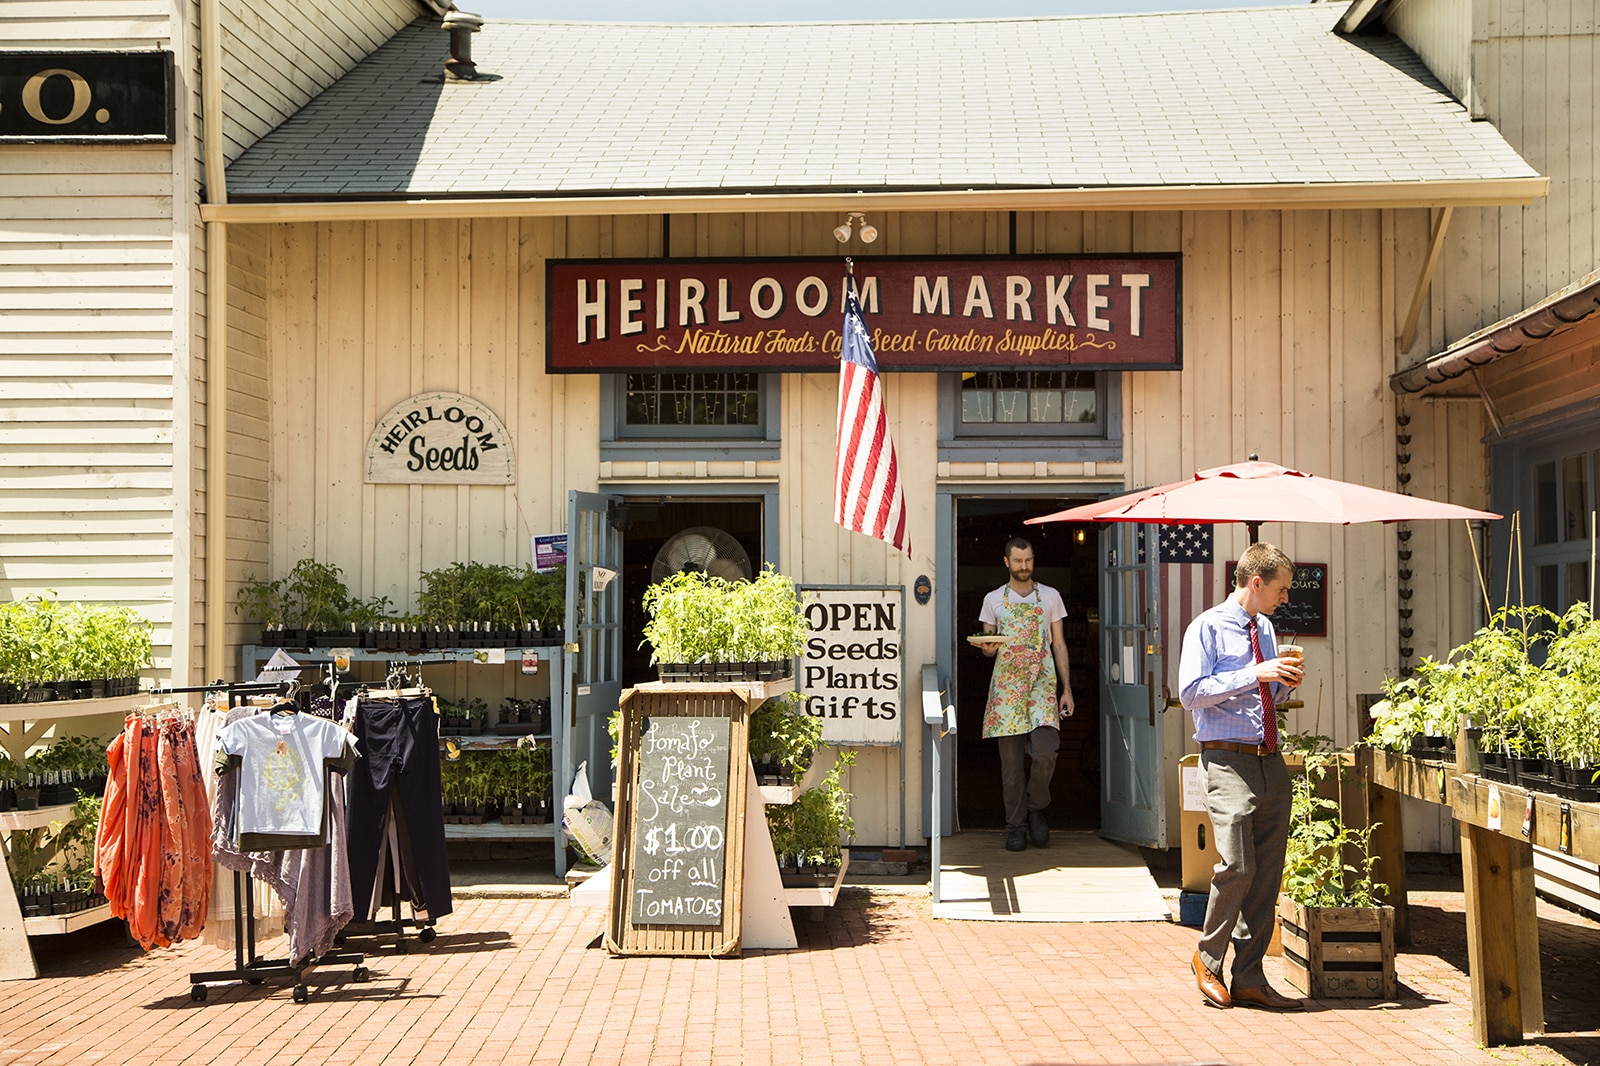 Heirloom Market at Comstock Ferre a natural grocery foods store and cafe opened early last year.